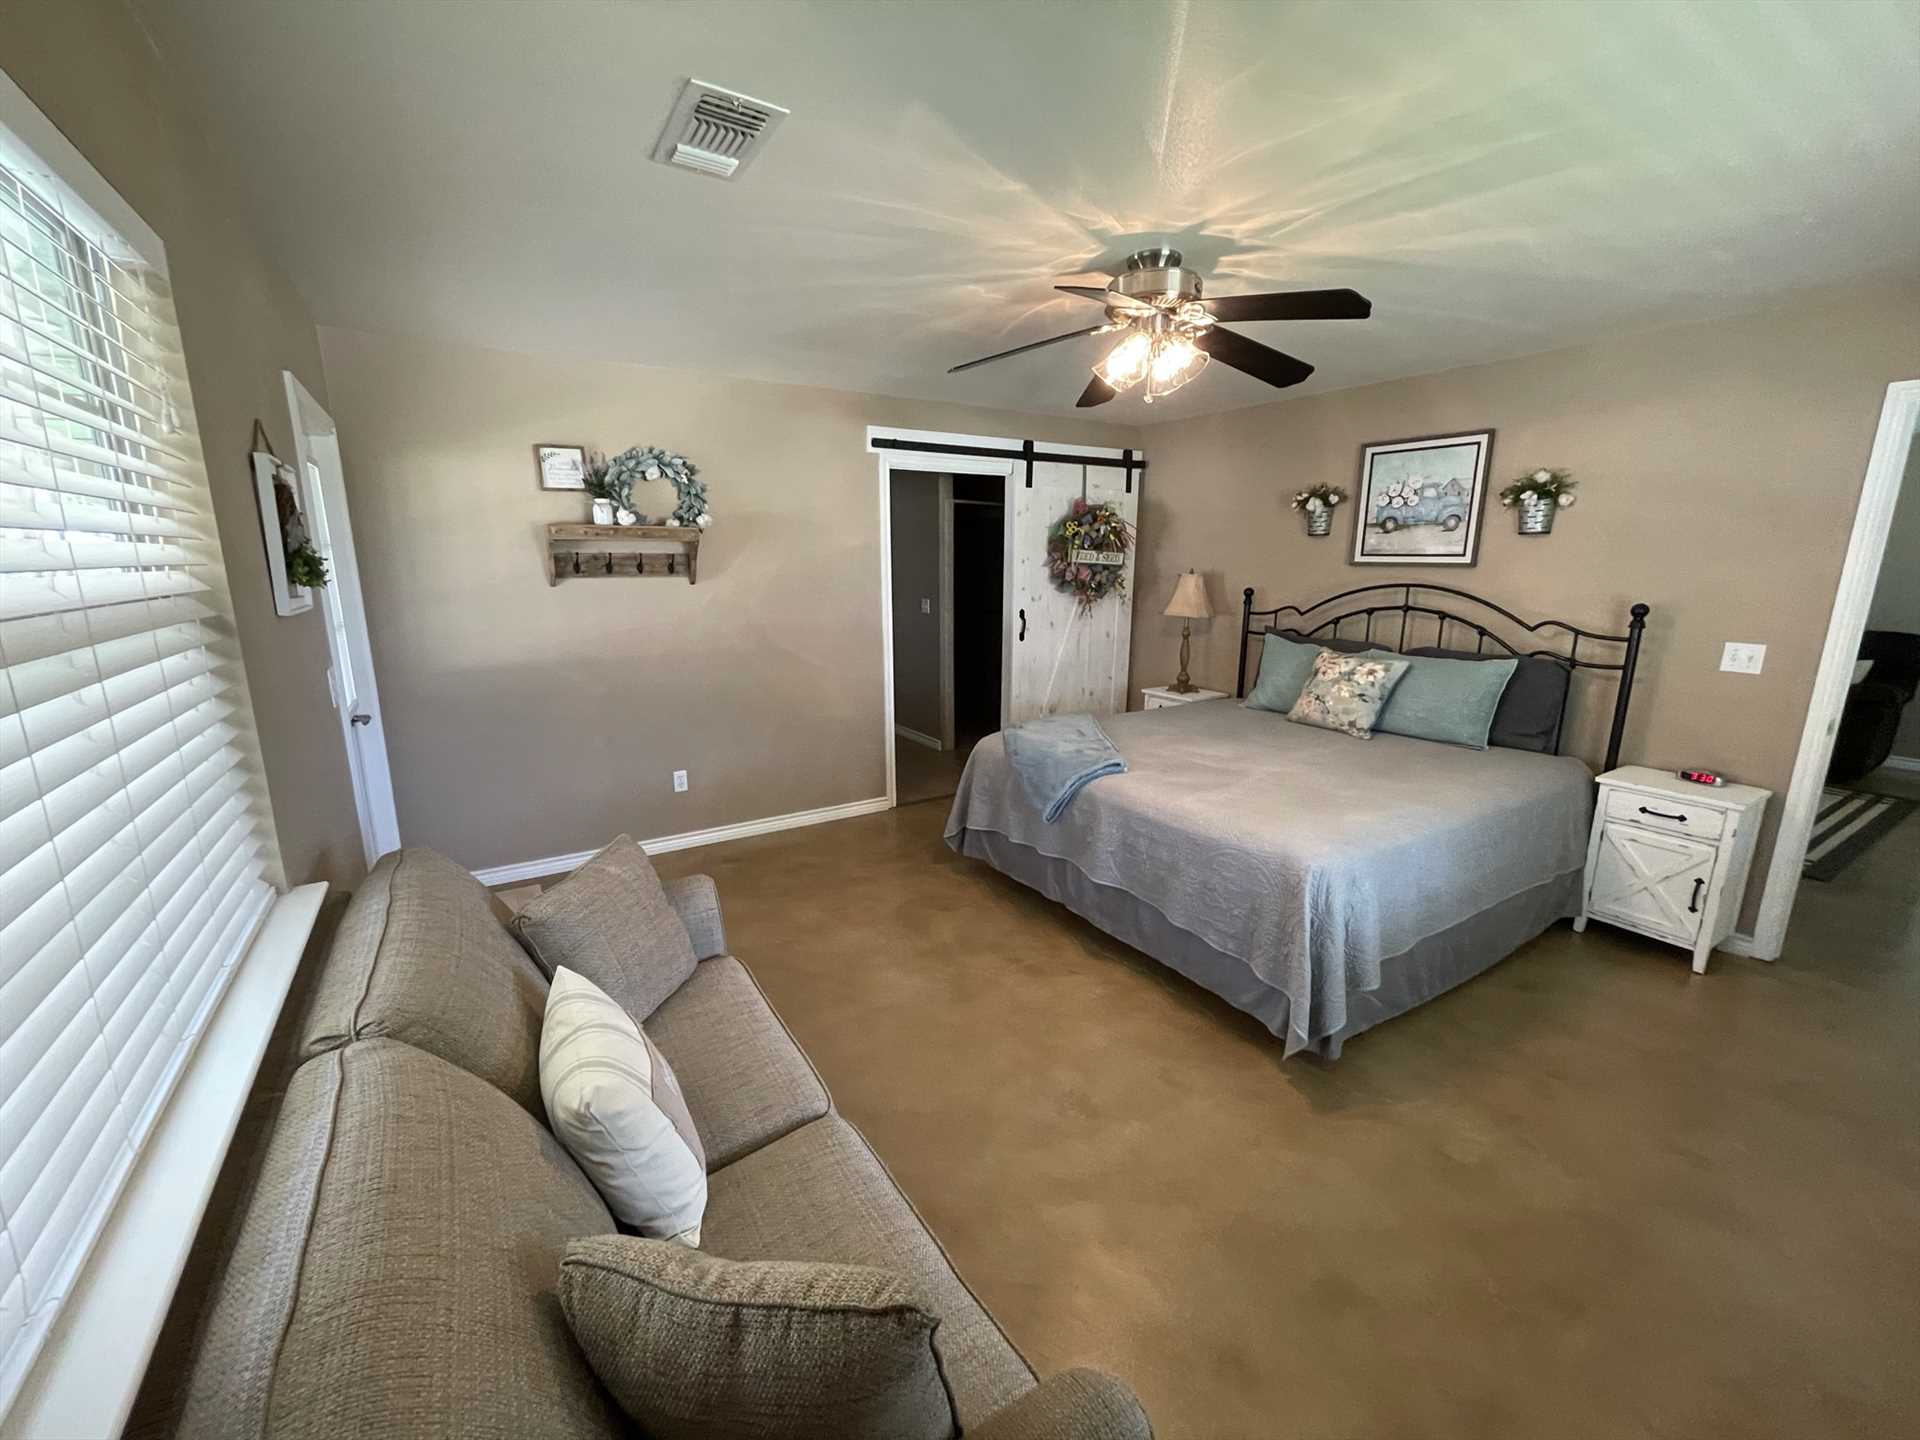                                                 Three comfy bedrooms come equipped with two king beds, a queen, and a full-sized bed...awesome sleeping space for the whole family!